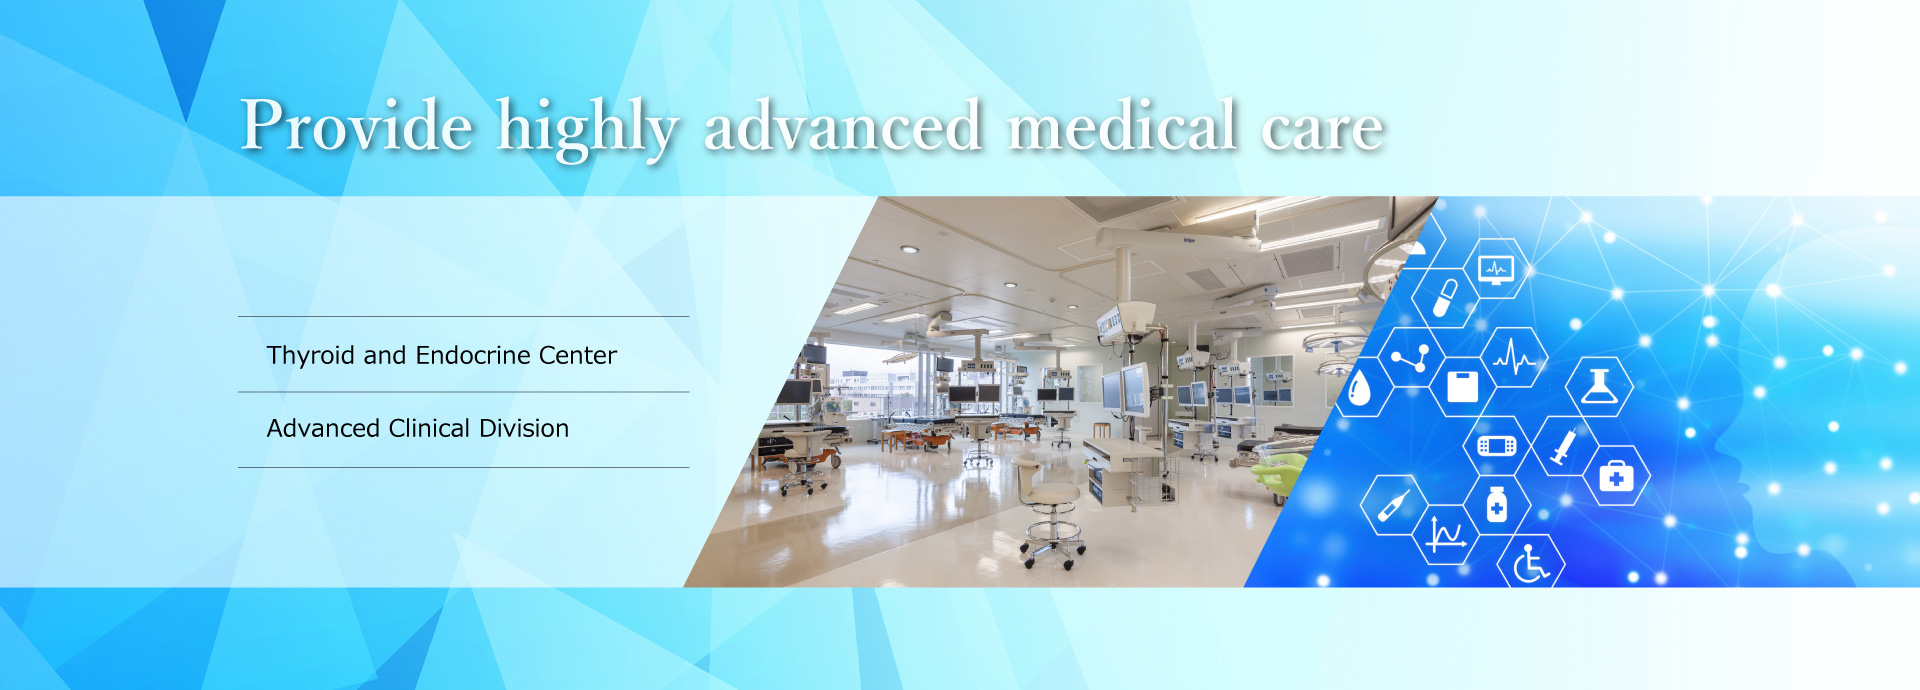 Provide highly advanced medical care